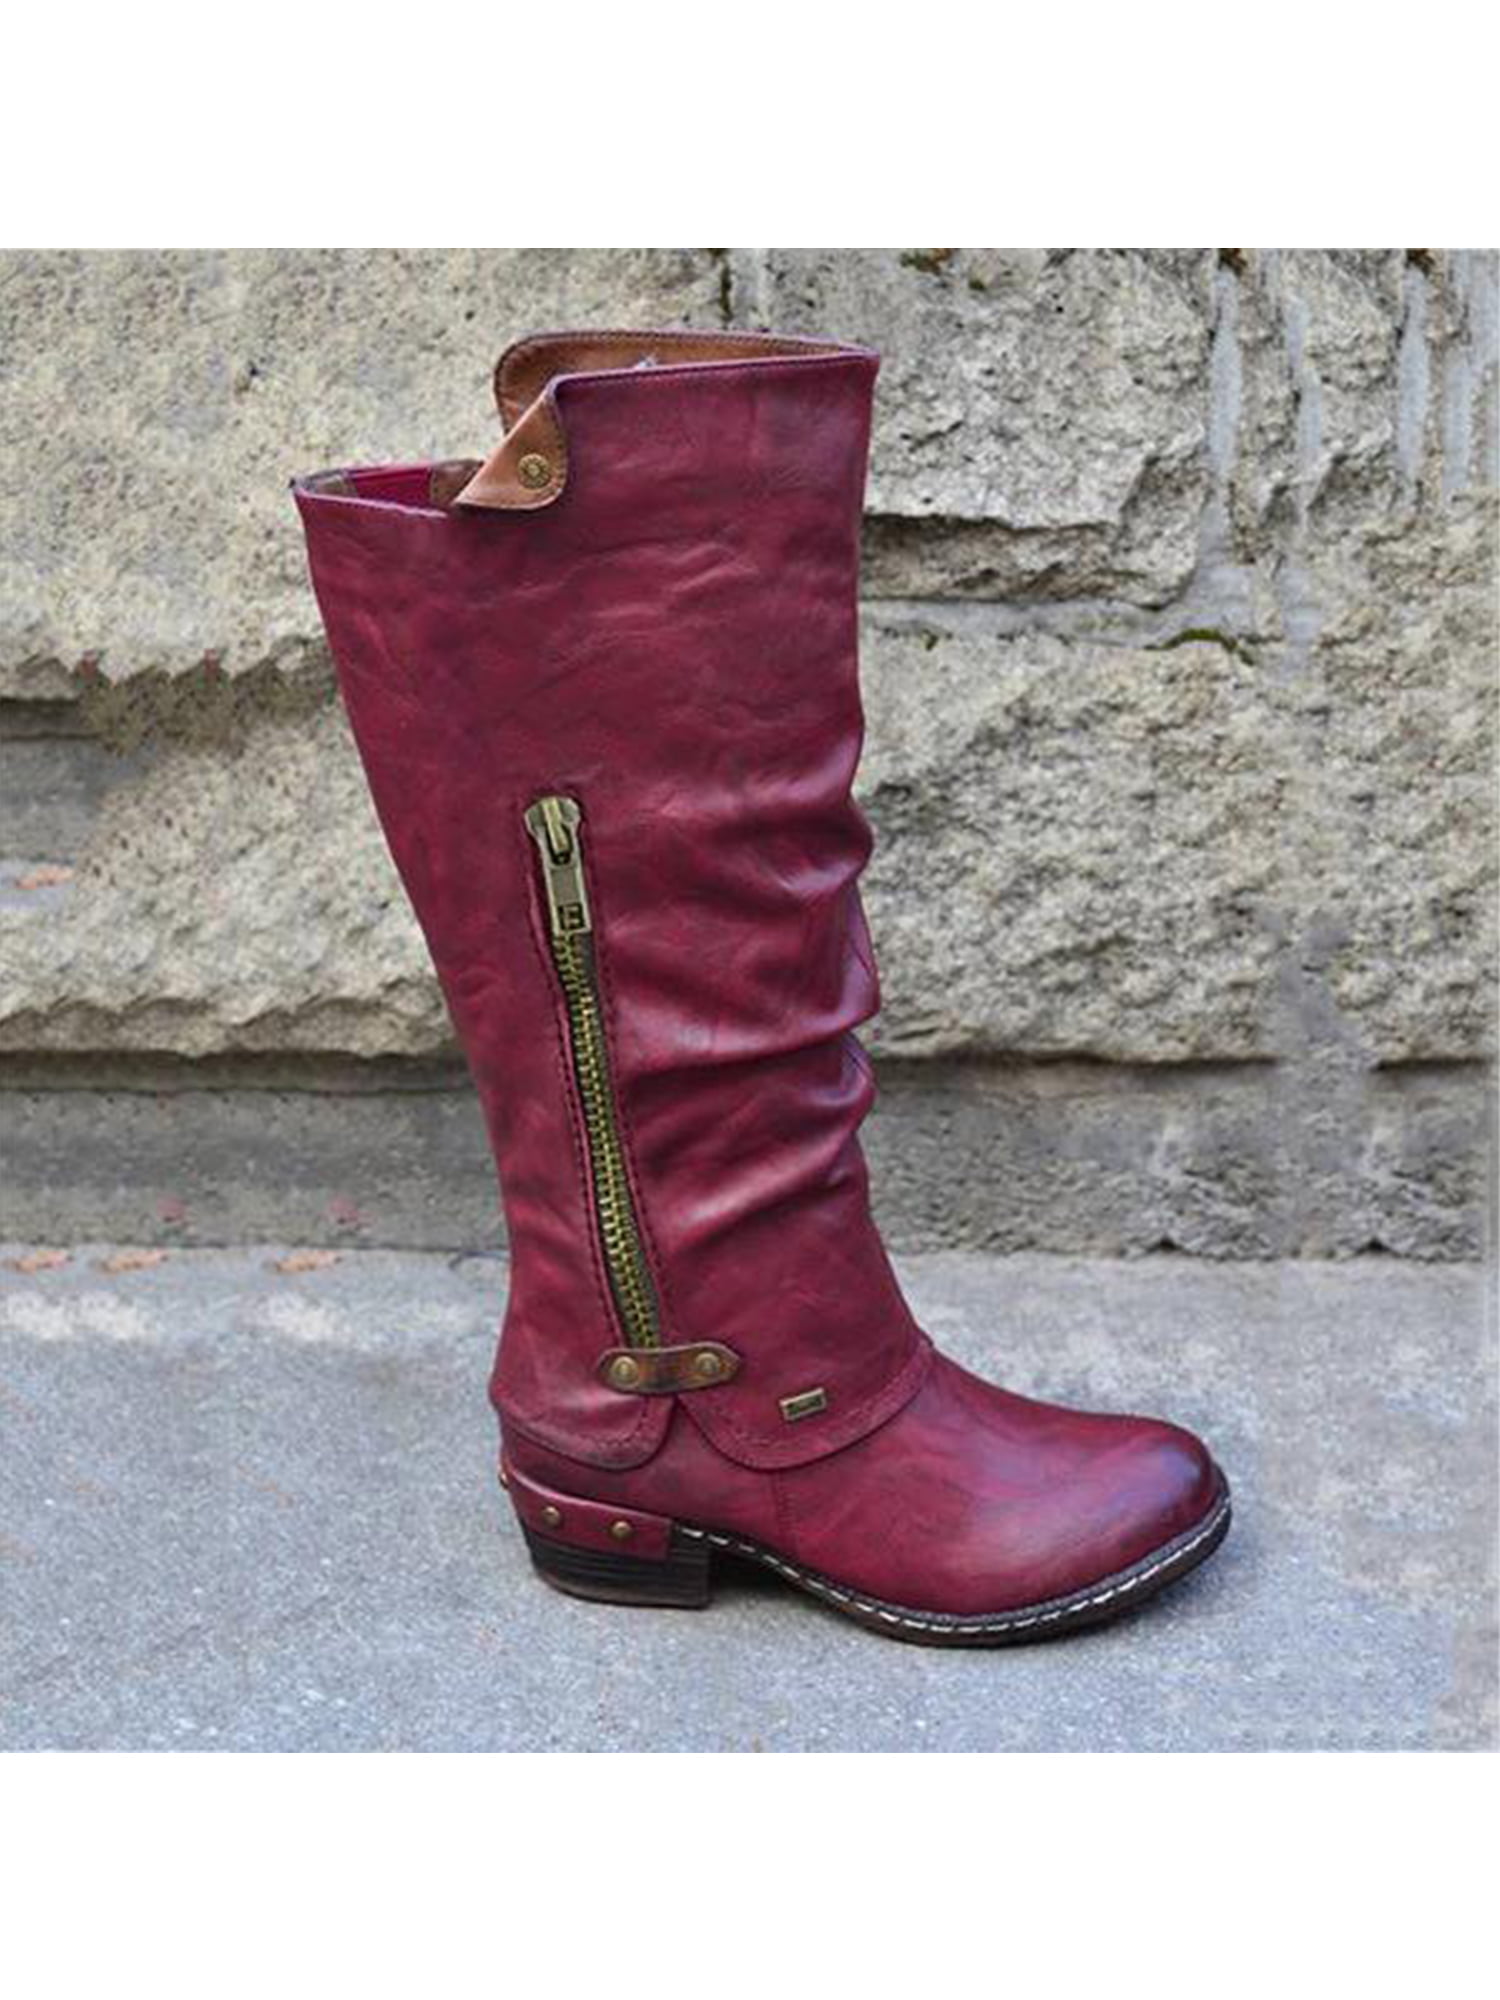 Details about   Women Flat Low Heel Knee High Ladies Mid Calf Boots Motorcycle Riding Boots D 